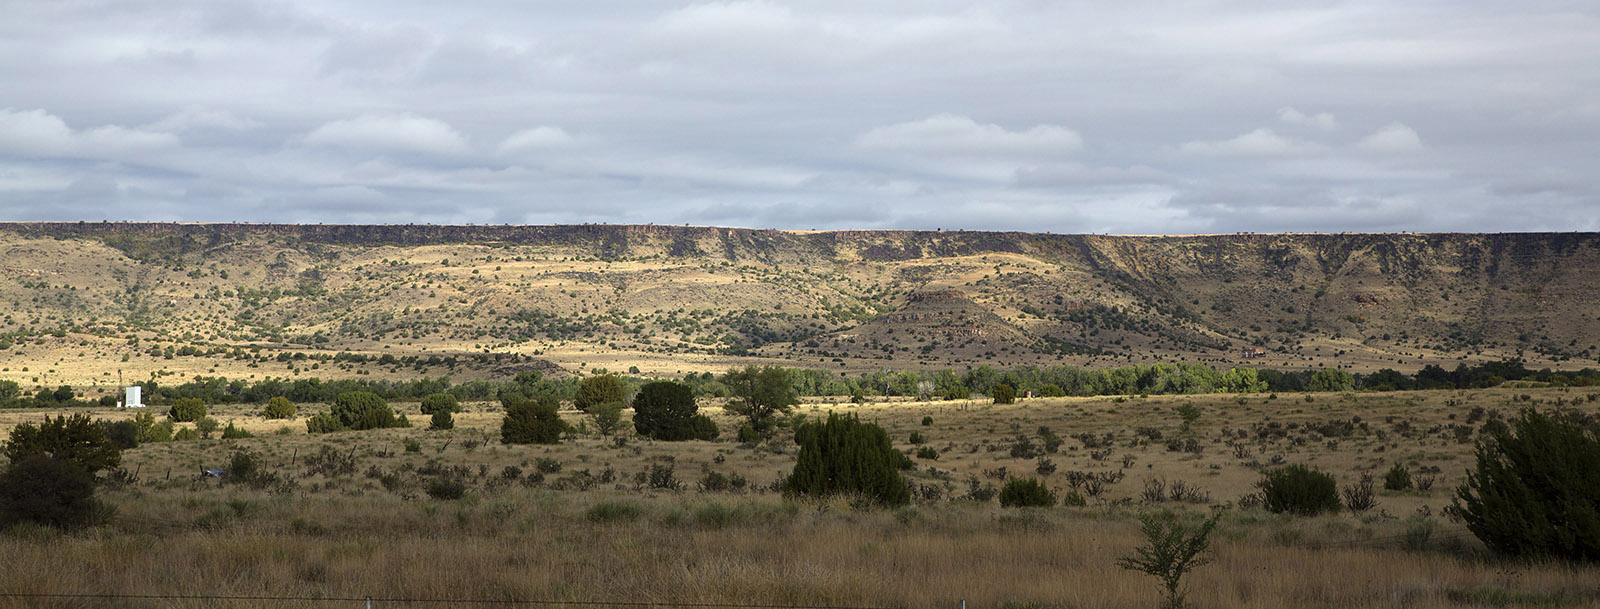 Black Mesa near Kenton, OK where Okie Tex Star Party was held.  Basalt from volcanic activity in the Neogene Period (23-2.5 million years ago) overlies sedimentary layers of sandstone from the Jurassic and Cretaceous Periods (200-66 million years ago).